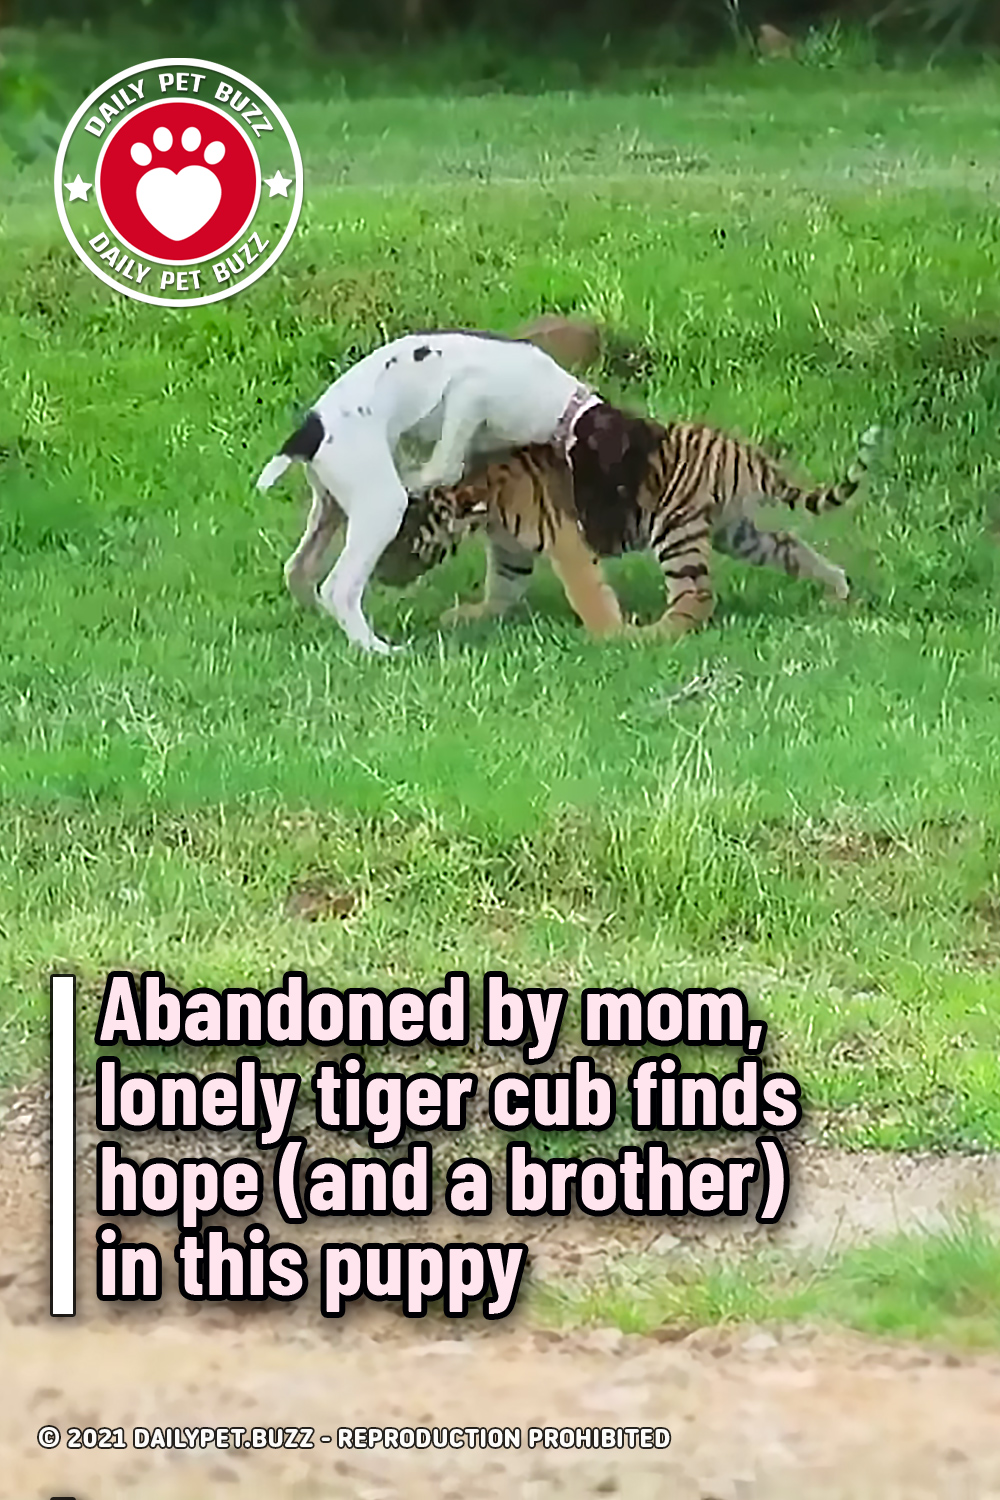 Abandoned by mom, lonely tiger cub finds hope (and a brother) in this puppy